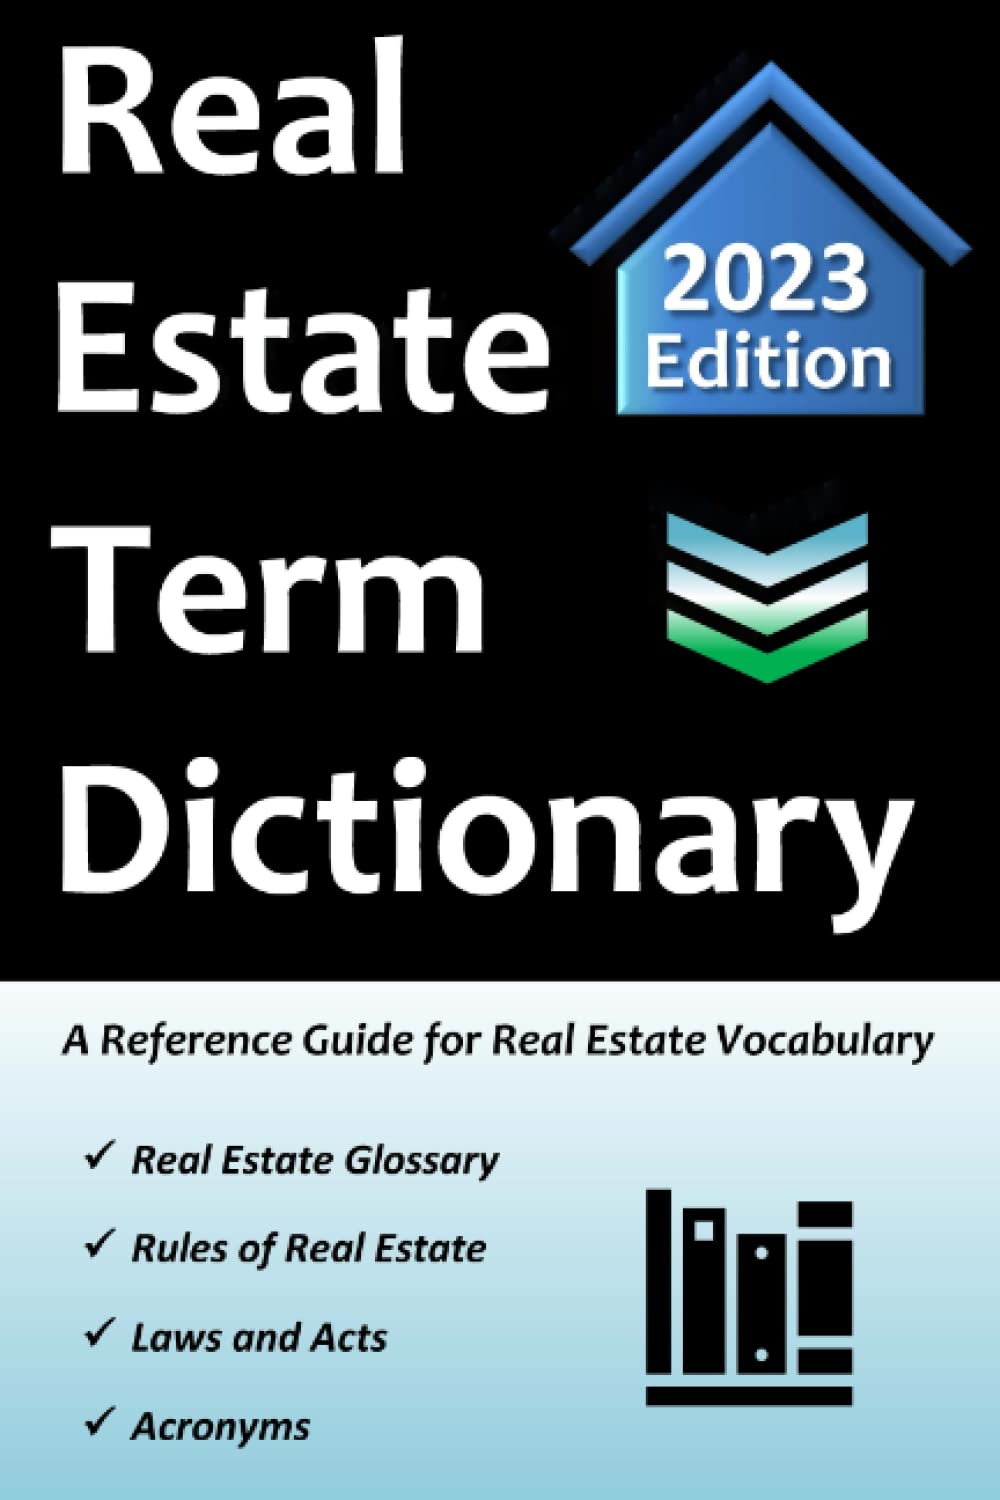 Real Estate Term Dictionary: Workbook Includes Full Glossary of Terminology, Acronyms, Laws & Acts